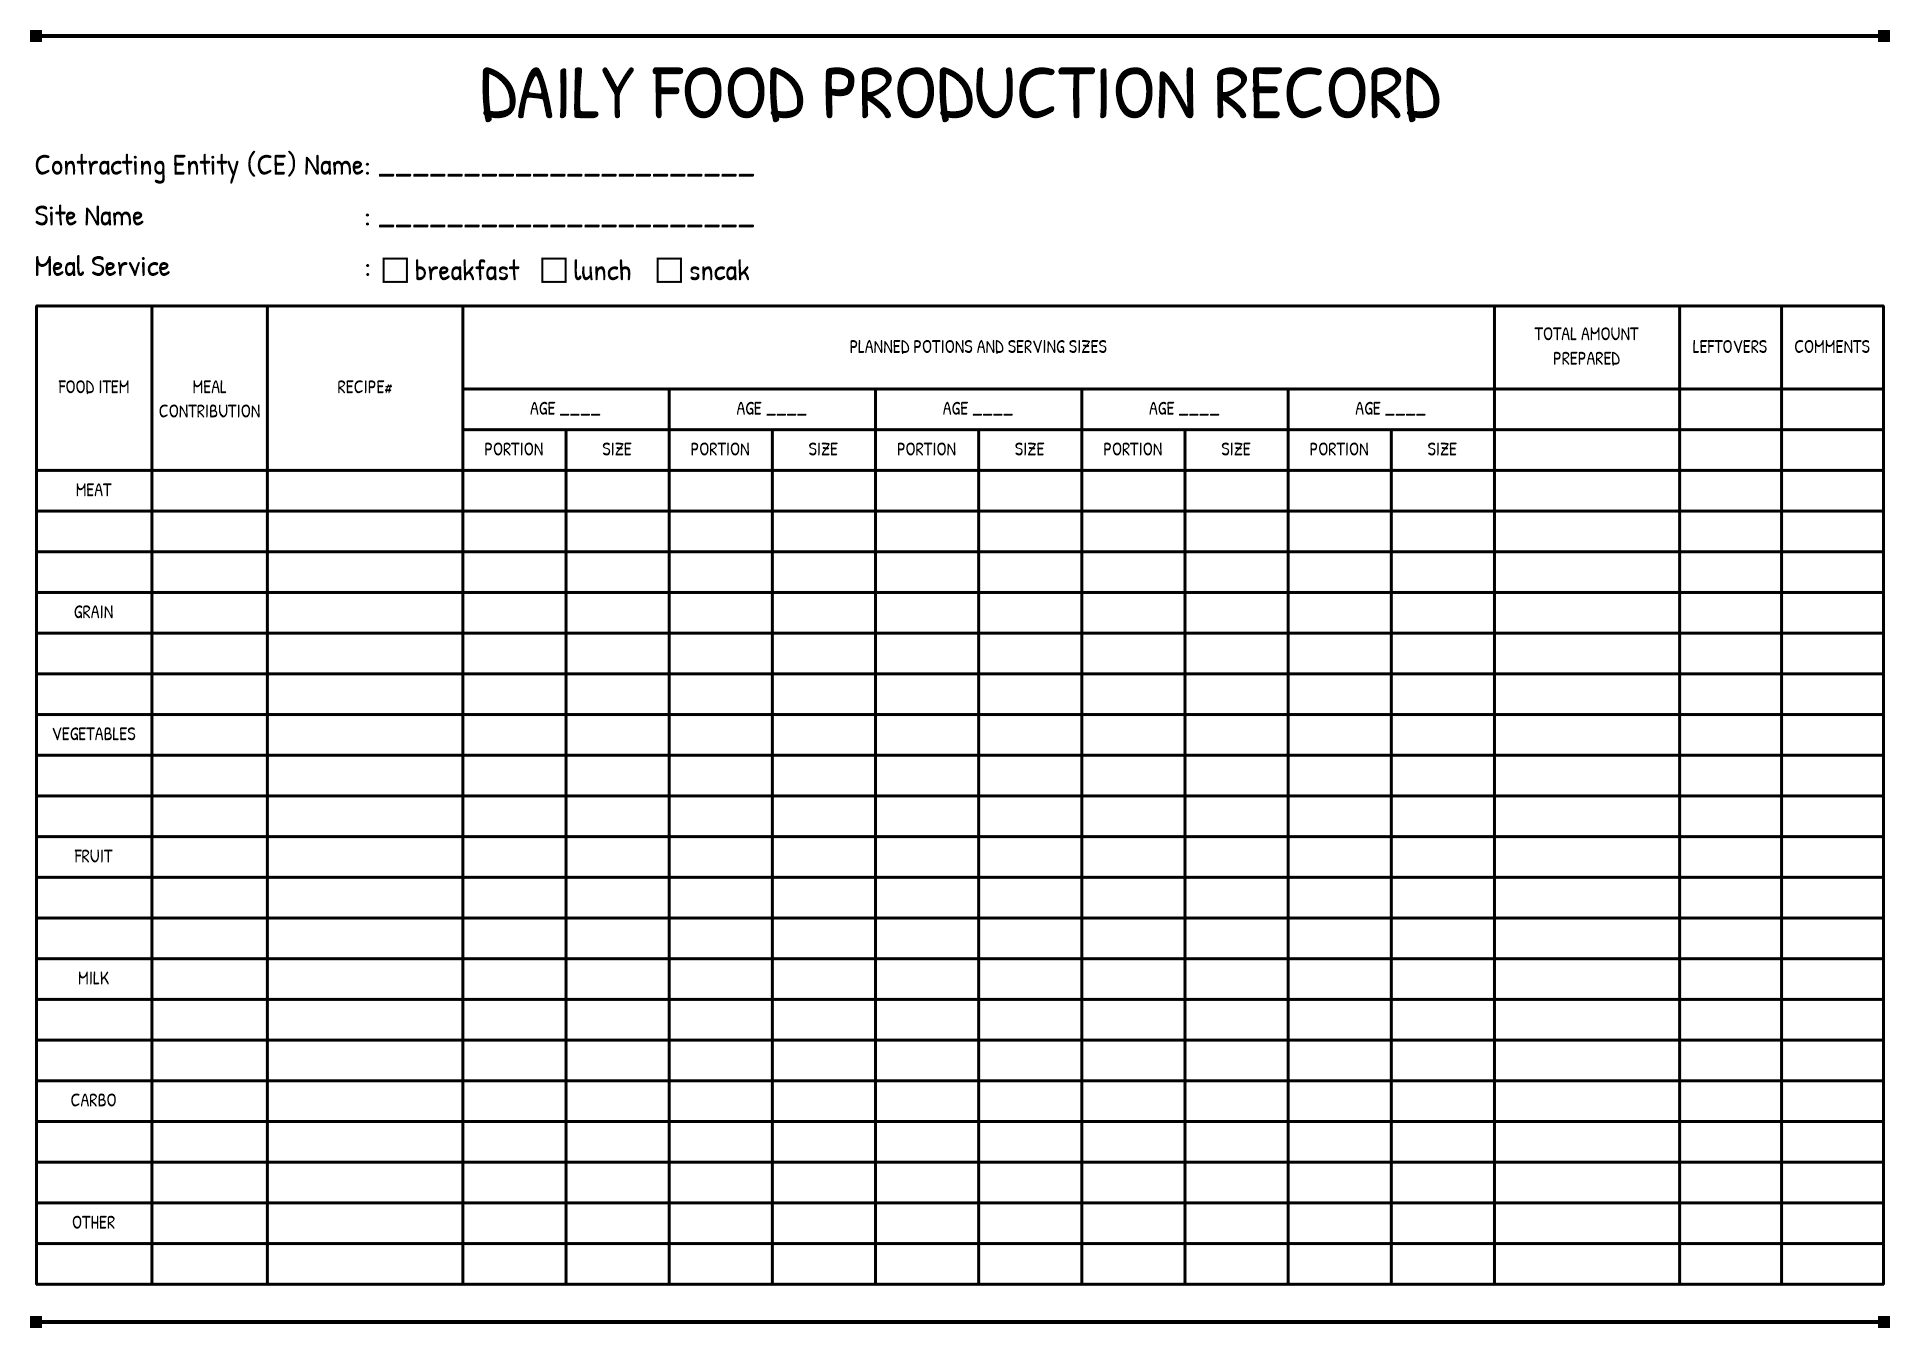 Daily Food Production Record